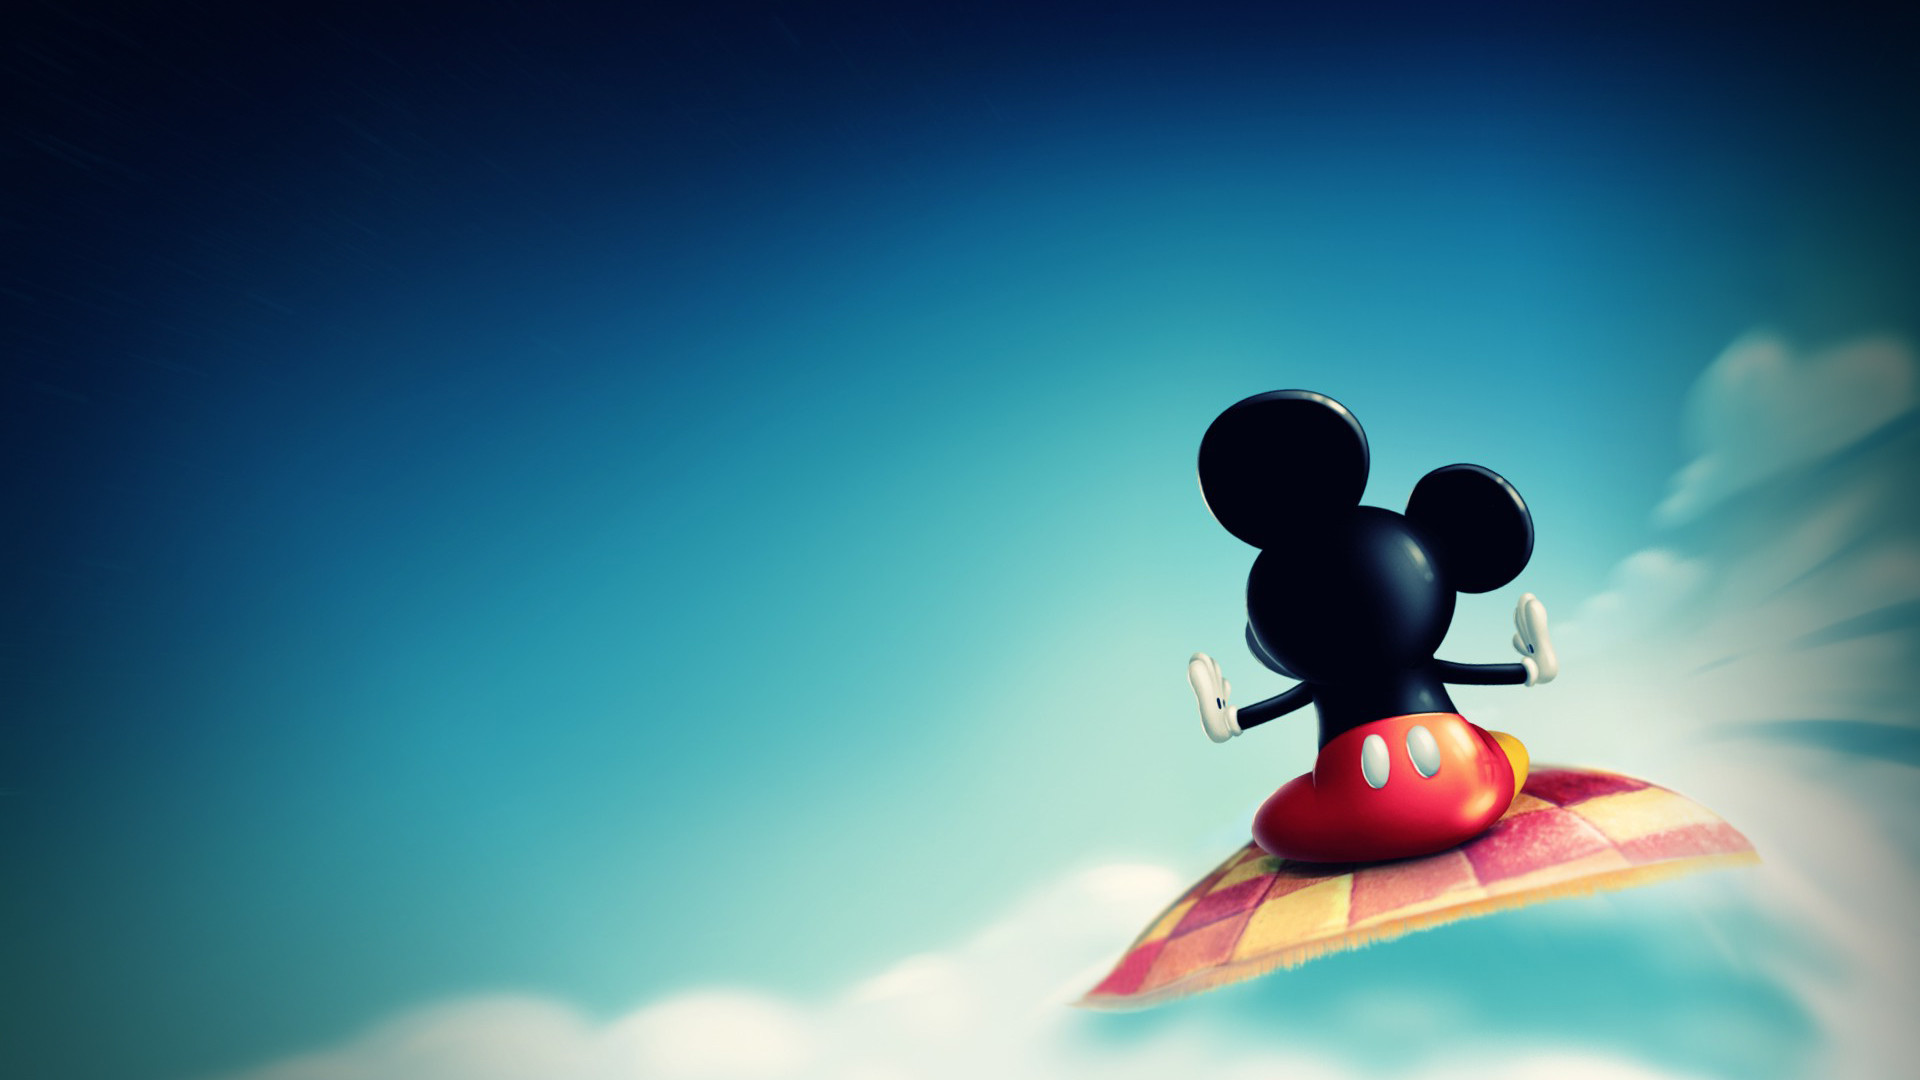 1920x1080 Mickey Mouse Hd Wallpapers Wallpapers Points Hmbqml ...